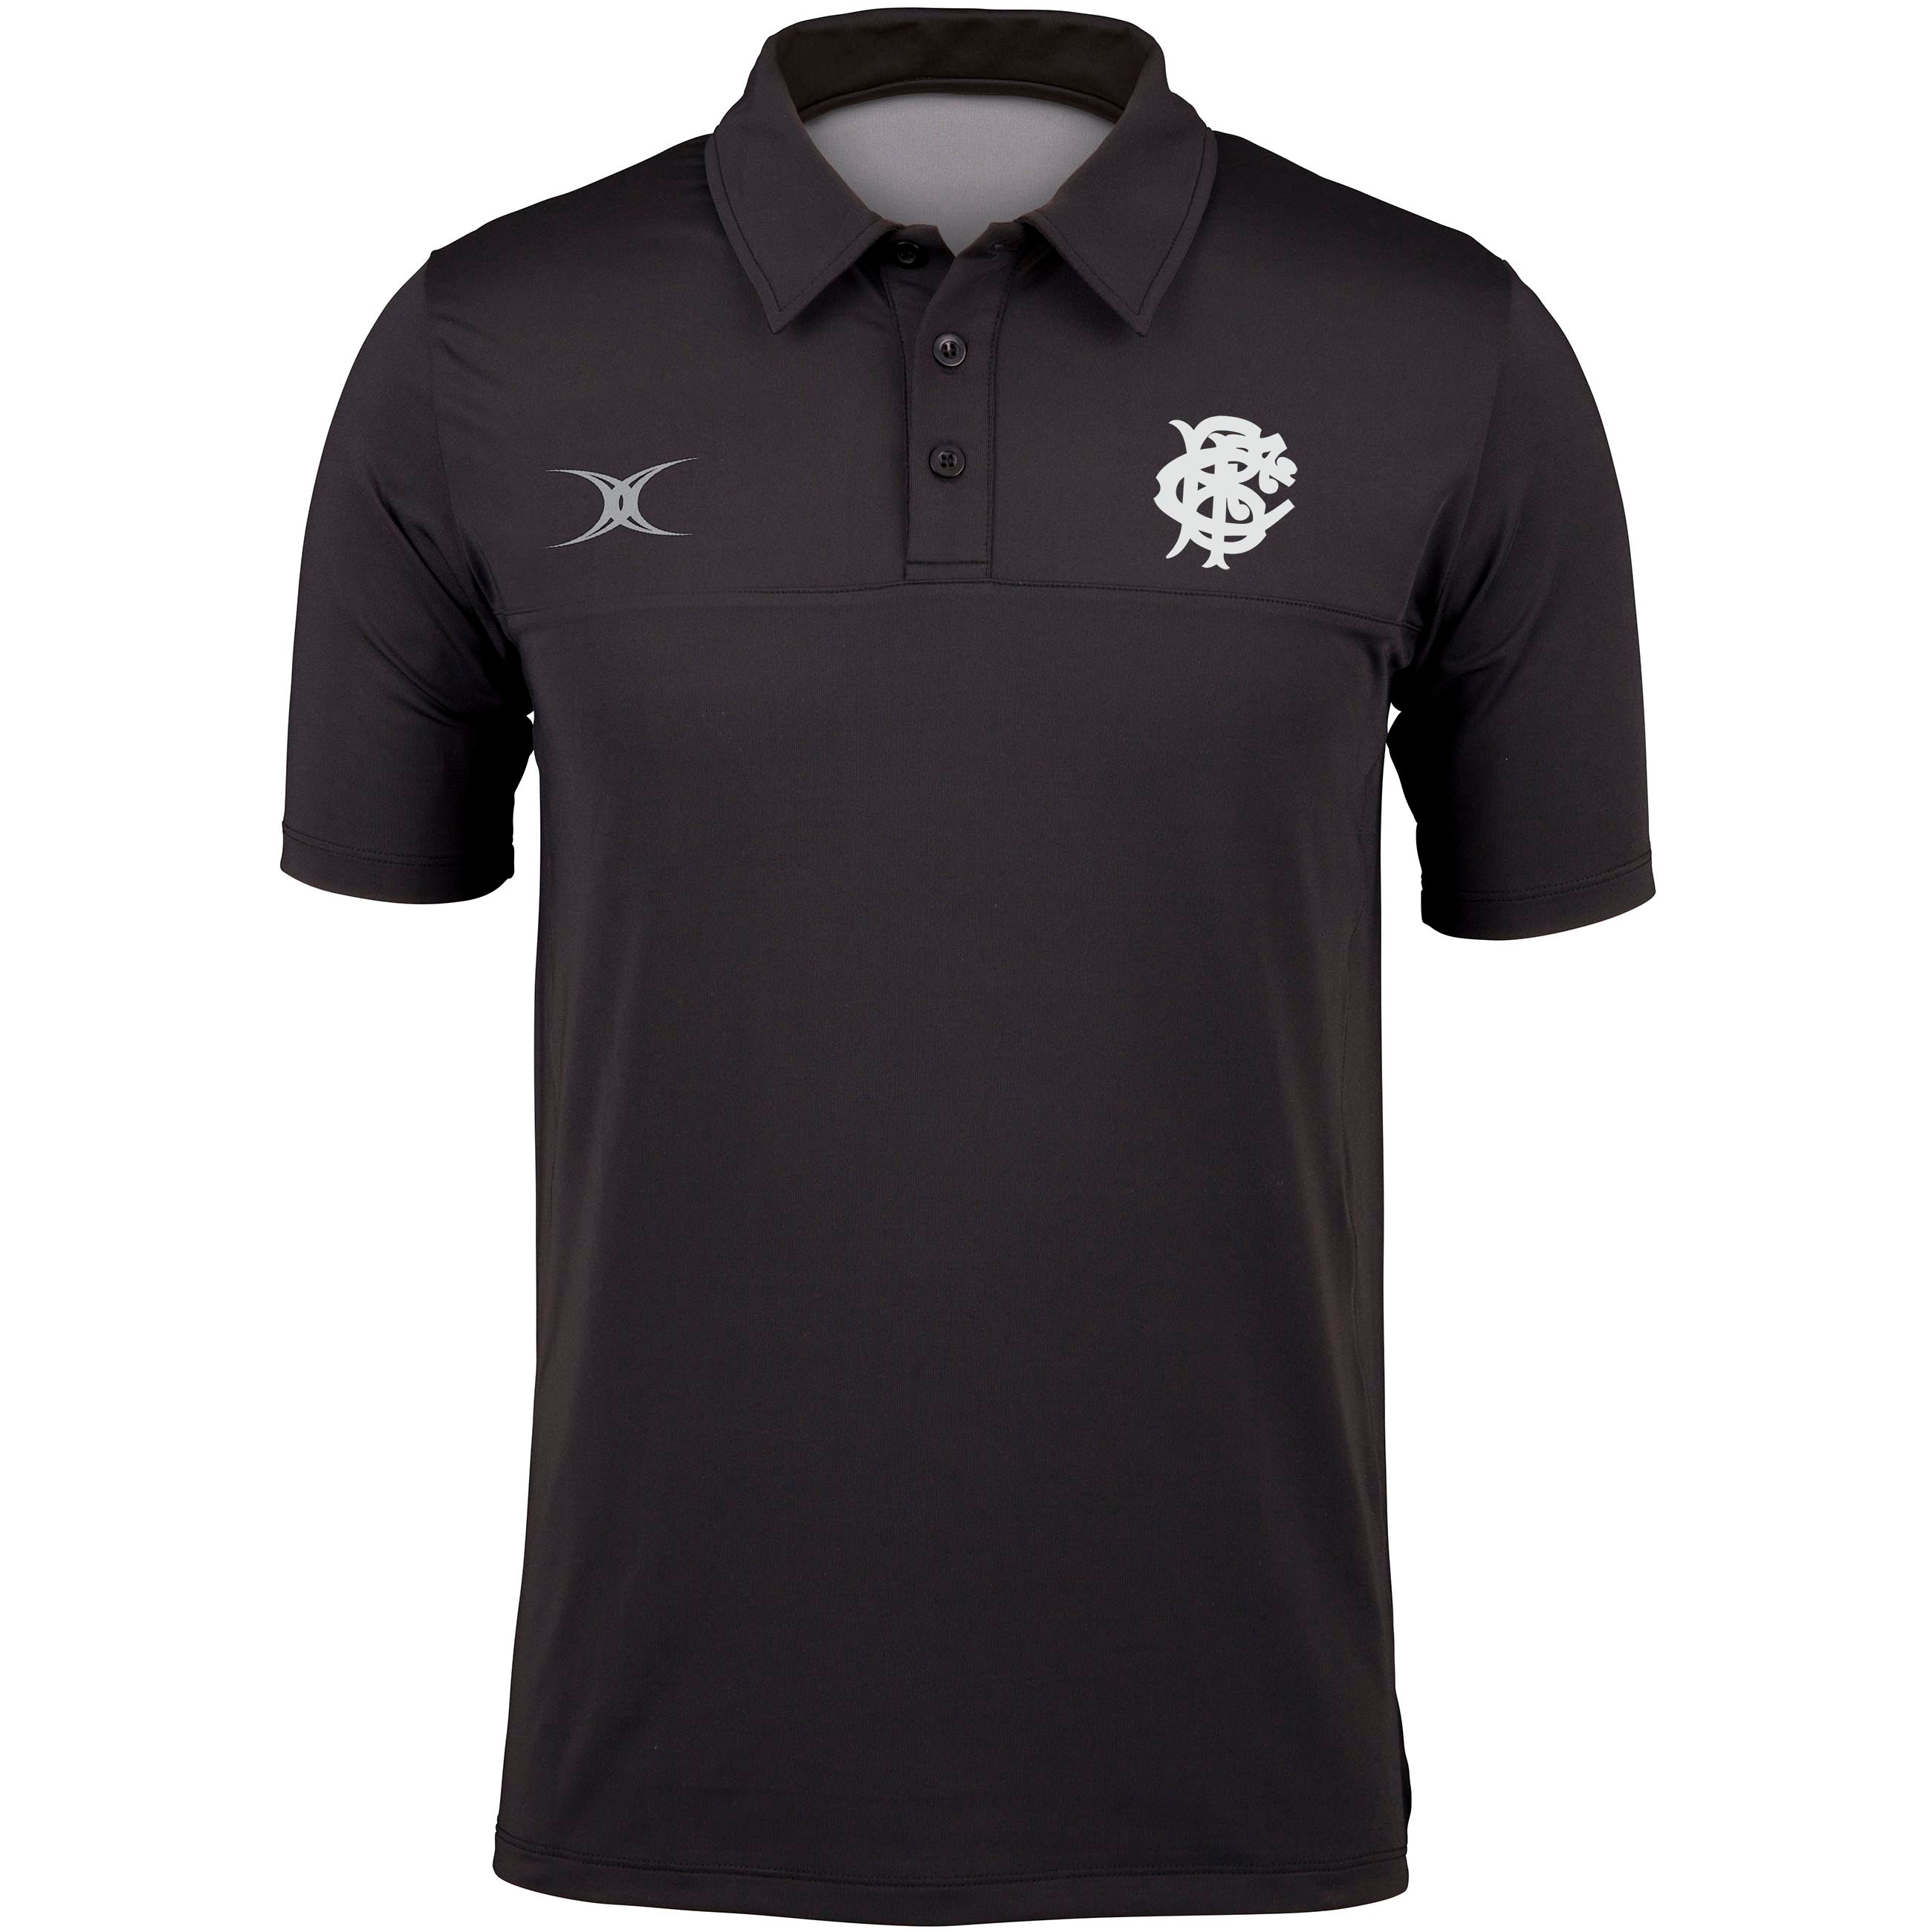 Barbarian FC Adult's Pro Polo - Black